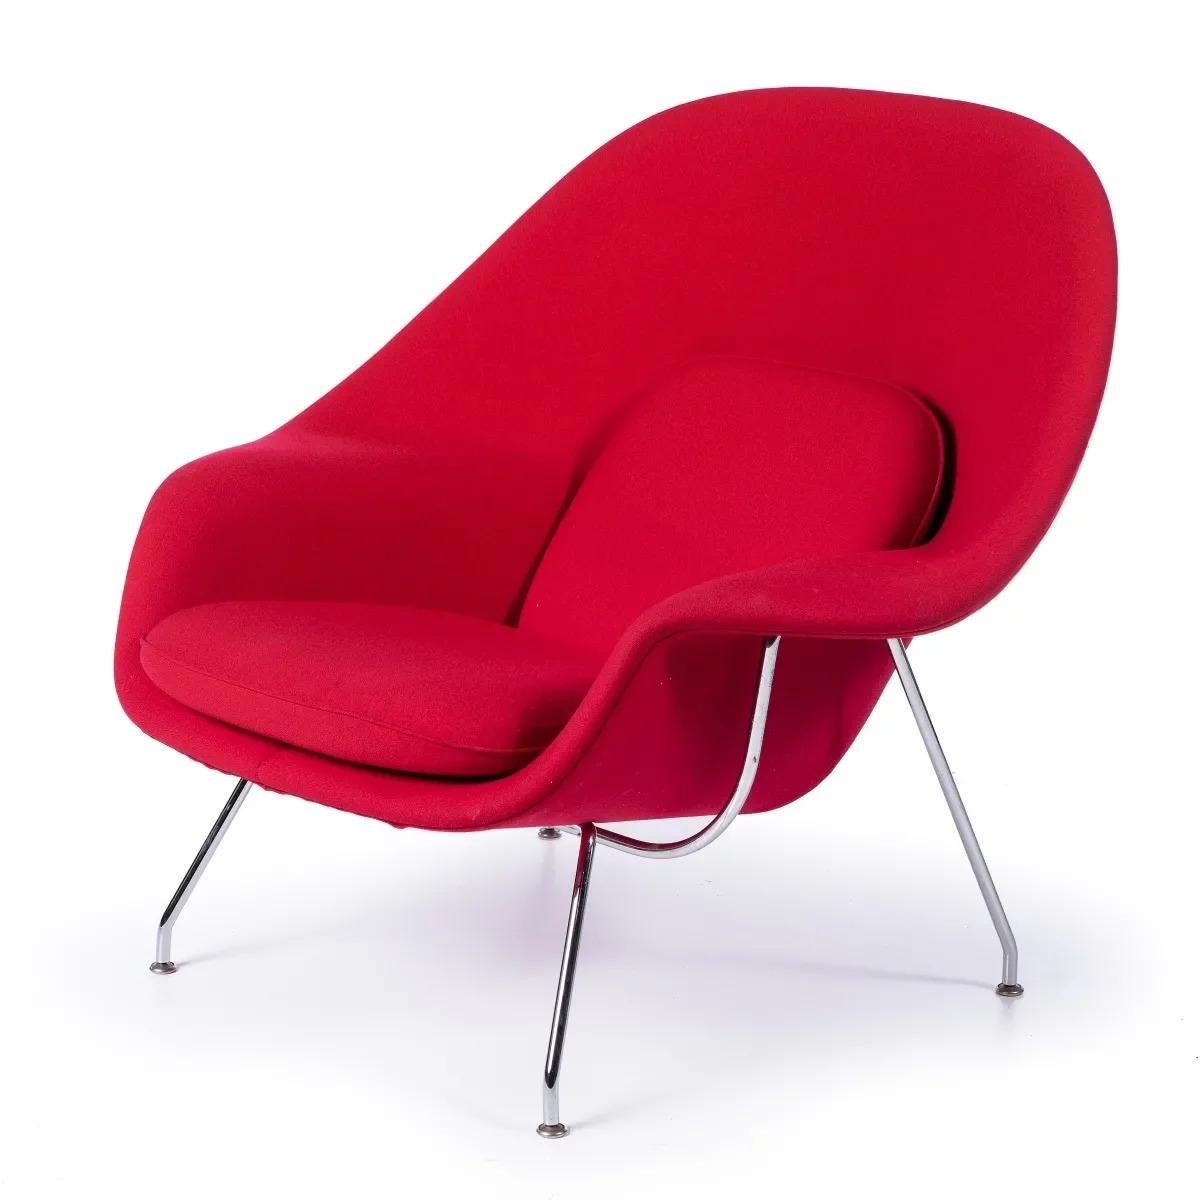 Armchair Womb chair
Created in 1948 by designer Eero Saarinen for Knoll. 
Seat and back in burgundy tones. 
Knoll marked stainless steel base. 
Dim.: 92 x 79 x 104 cm.

Eero Saarinen
b. Finland
1910-1961
Born to world famous parents,